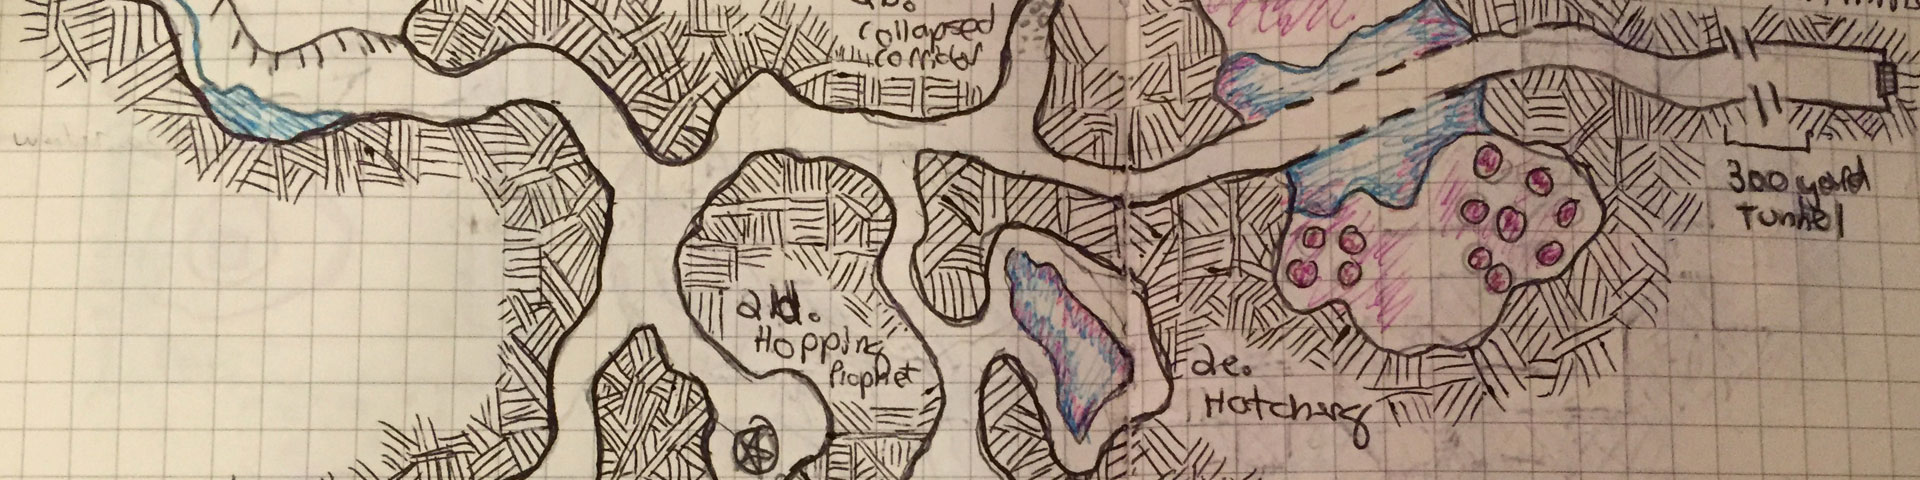 A hand-drawn map depicting a series of interconnected caverns.